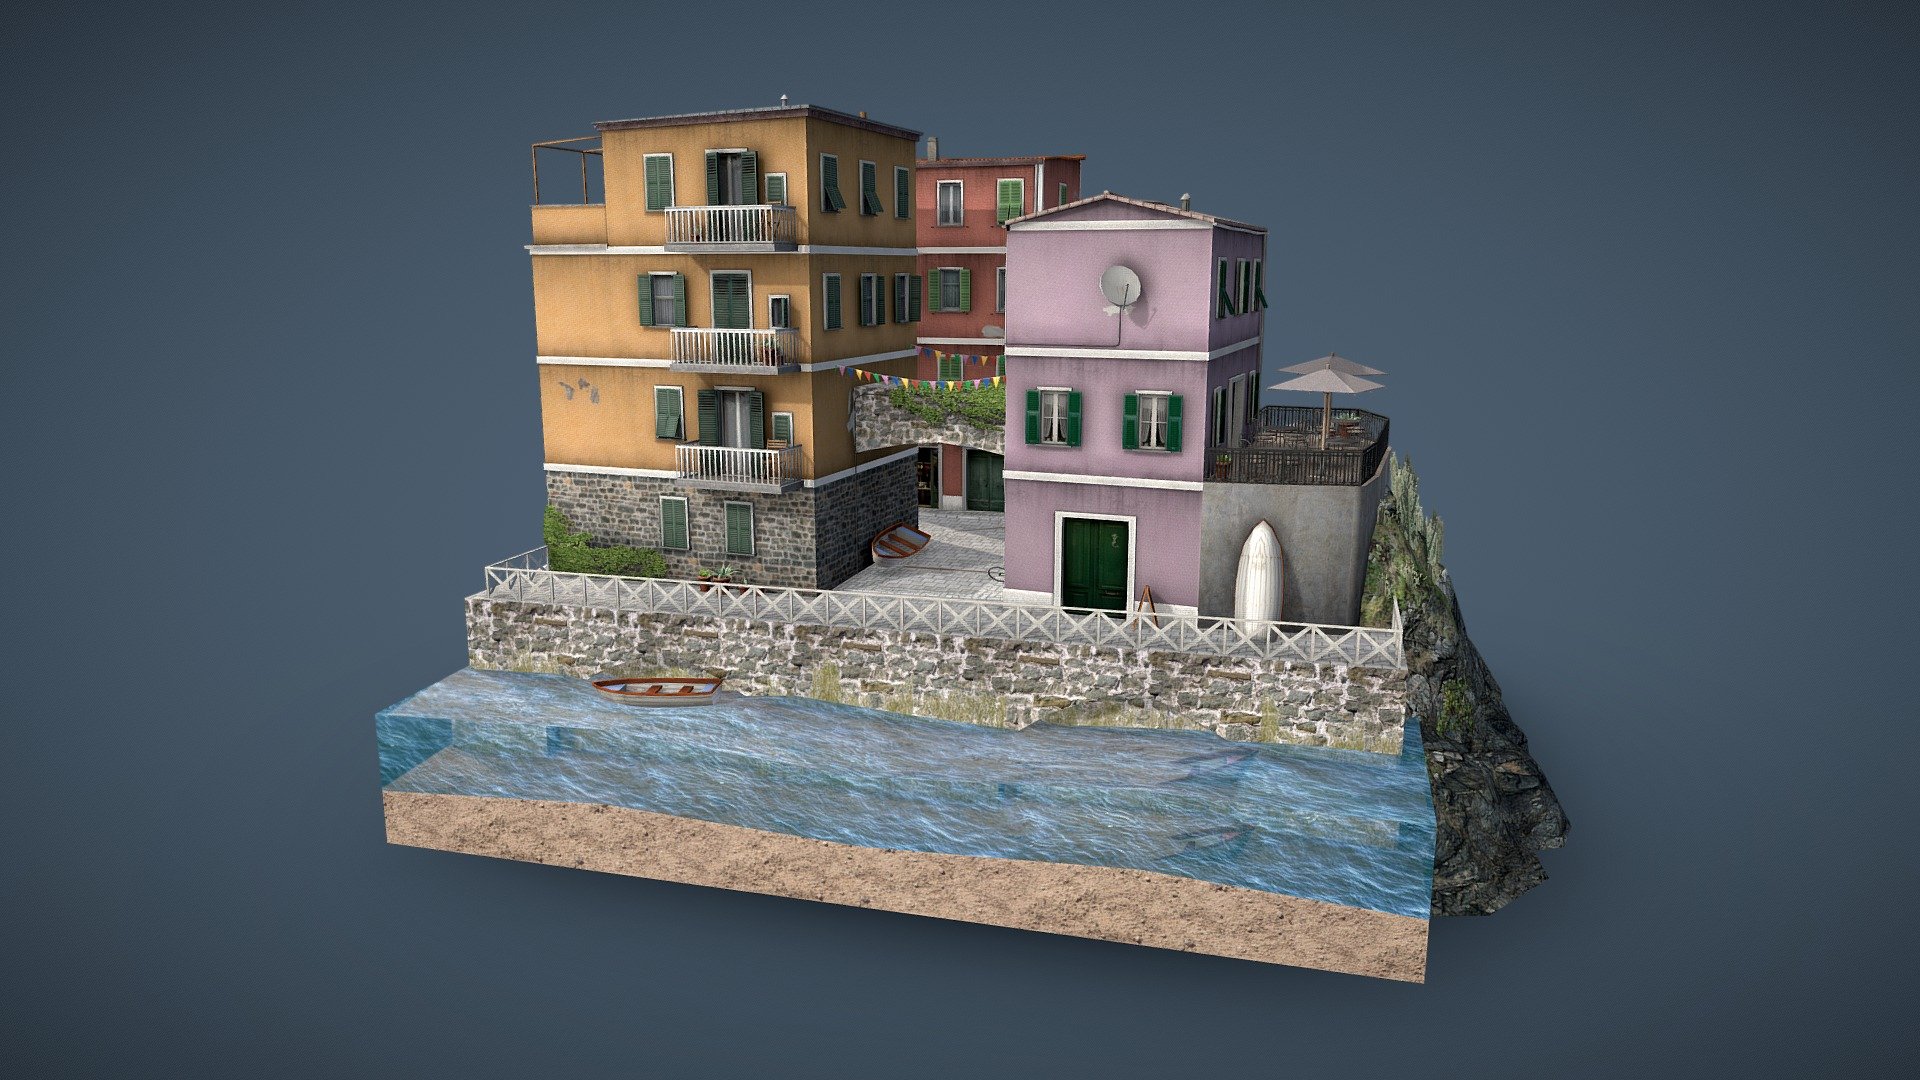 This LowPoly Cityscene is based on Cinque Terre, Italy.




First Semester, 3D LowPoly Assignment at DAE

Modeled in 3ds Max, textured in Photoshop.
Diffuse and Opacity only.

Any kind of feedback is highly appreciated! - LowPoly Cityscene - Cinque Terre - 3D model by Matthias Schmitz (@Ripred) 3d model